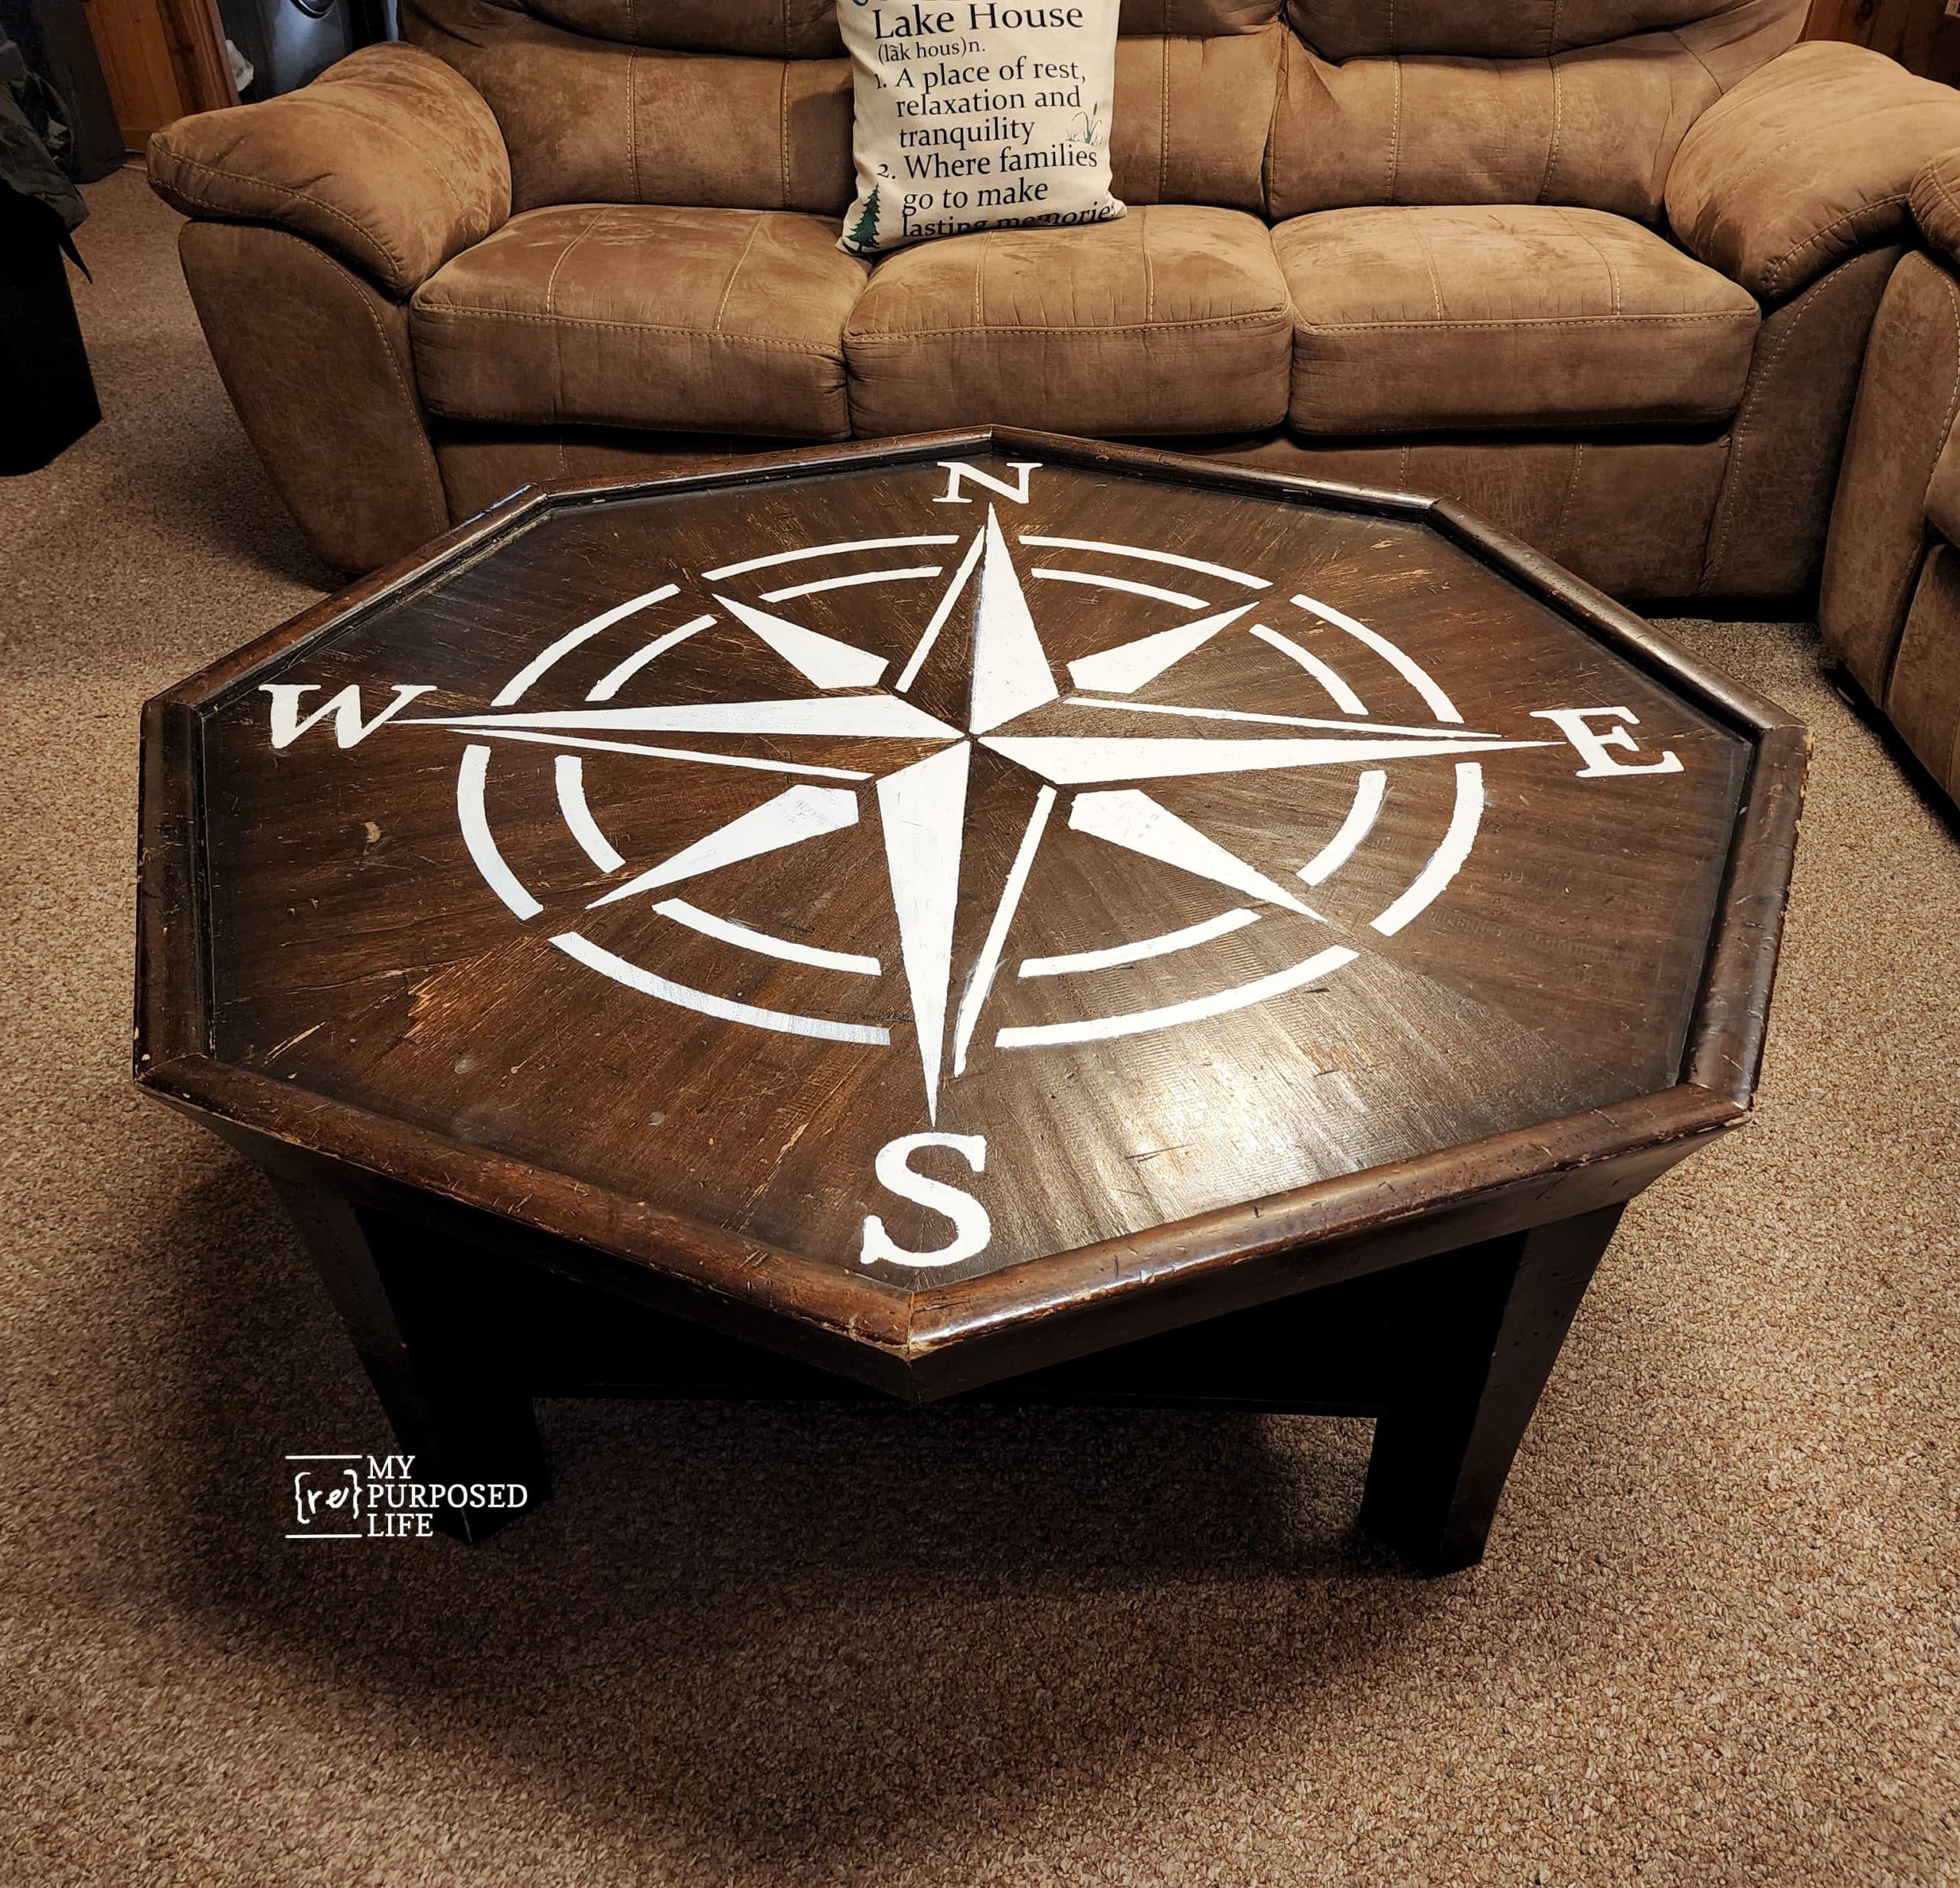 octagon table with a rose compass stenciled on it